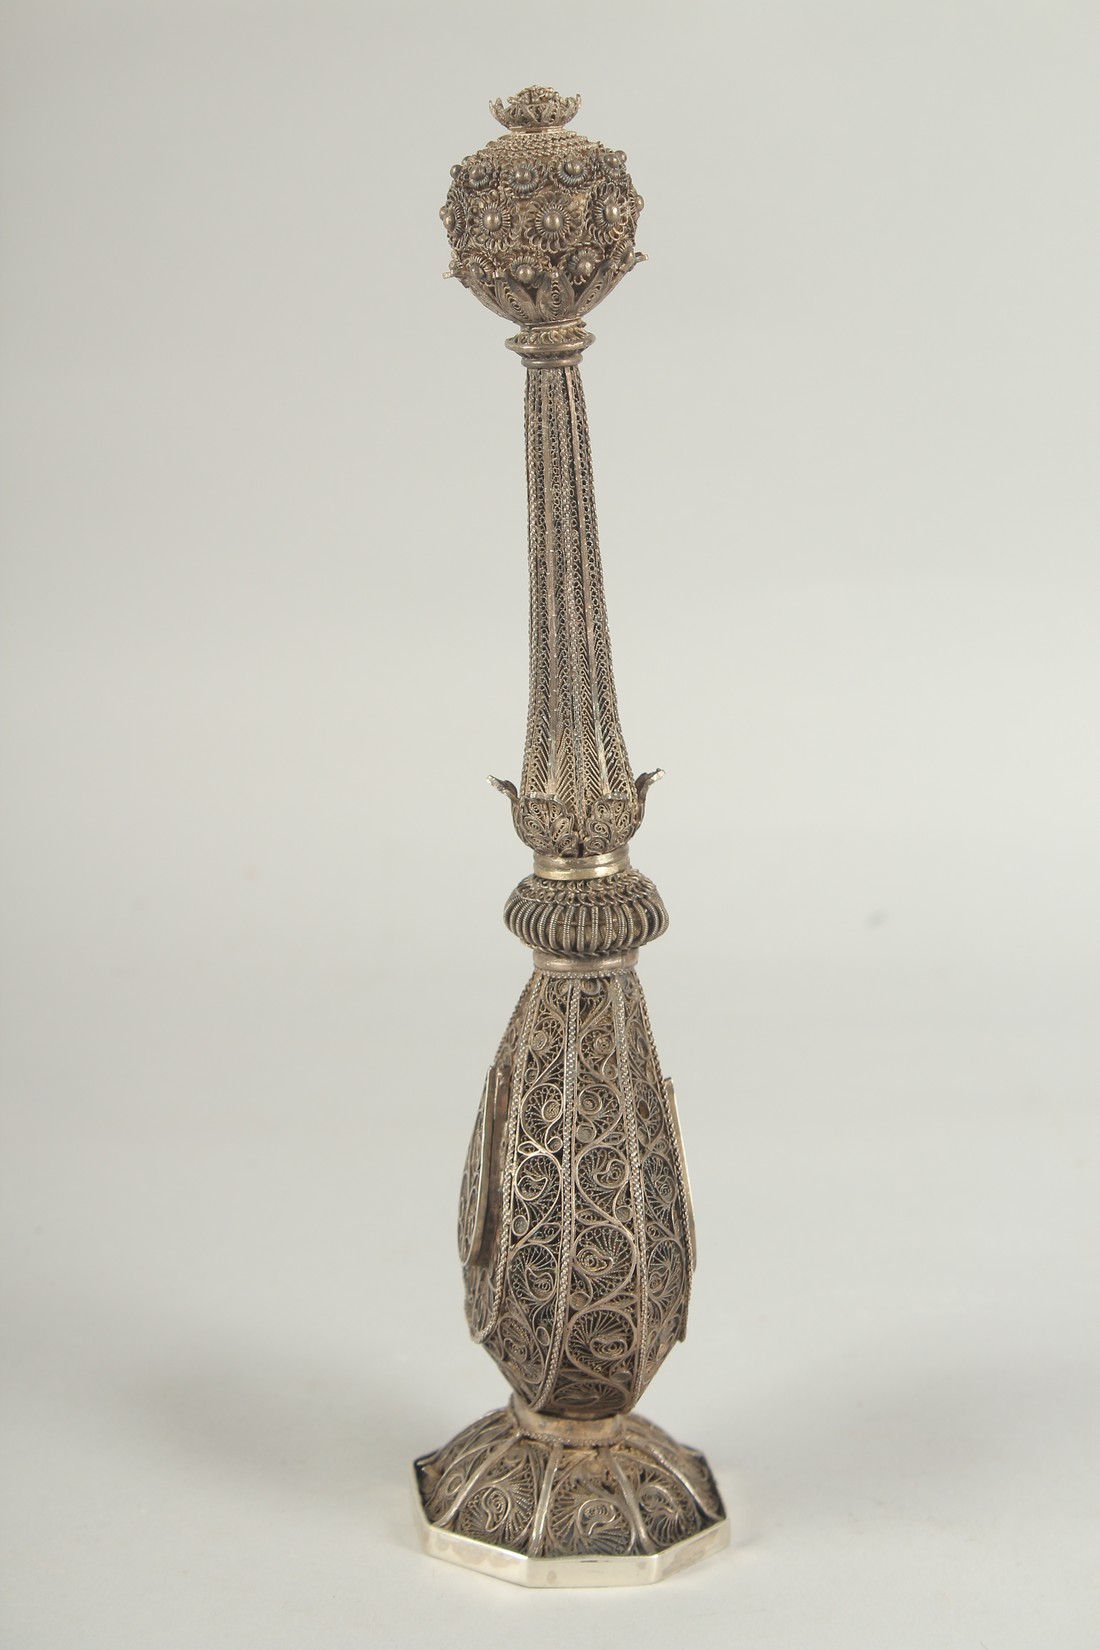 A FINE 19TH CENTURY INDIAN SILVER FILIGREE ROSEWATER SPRINKLER, 27cm high. - Image 2 of 10